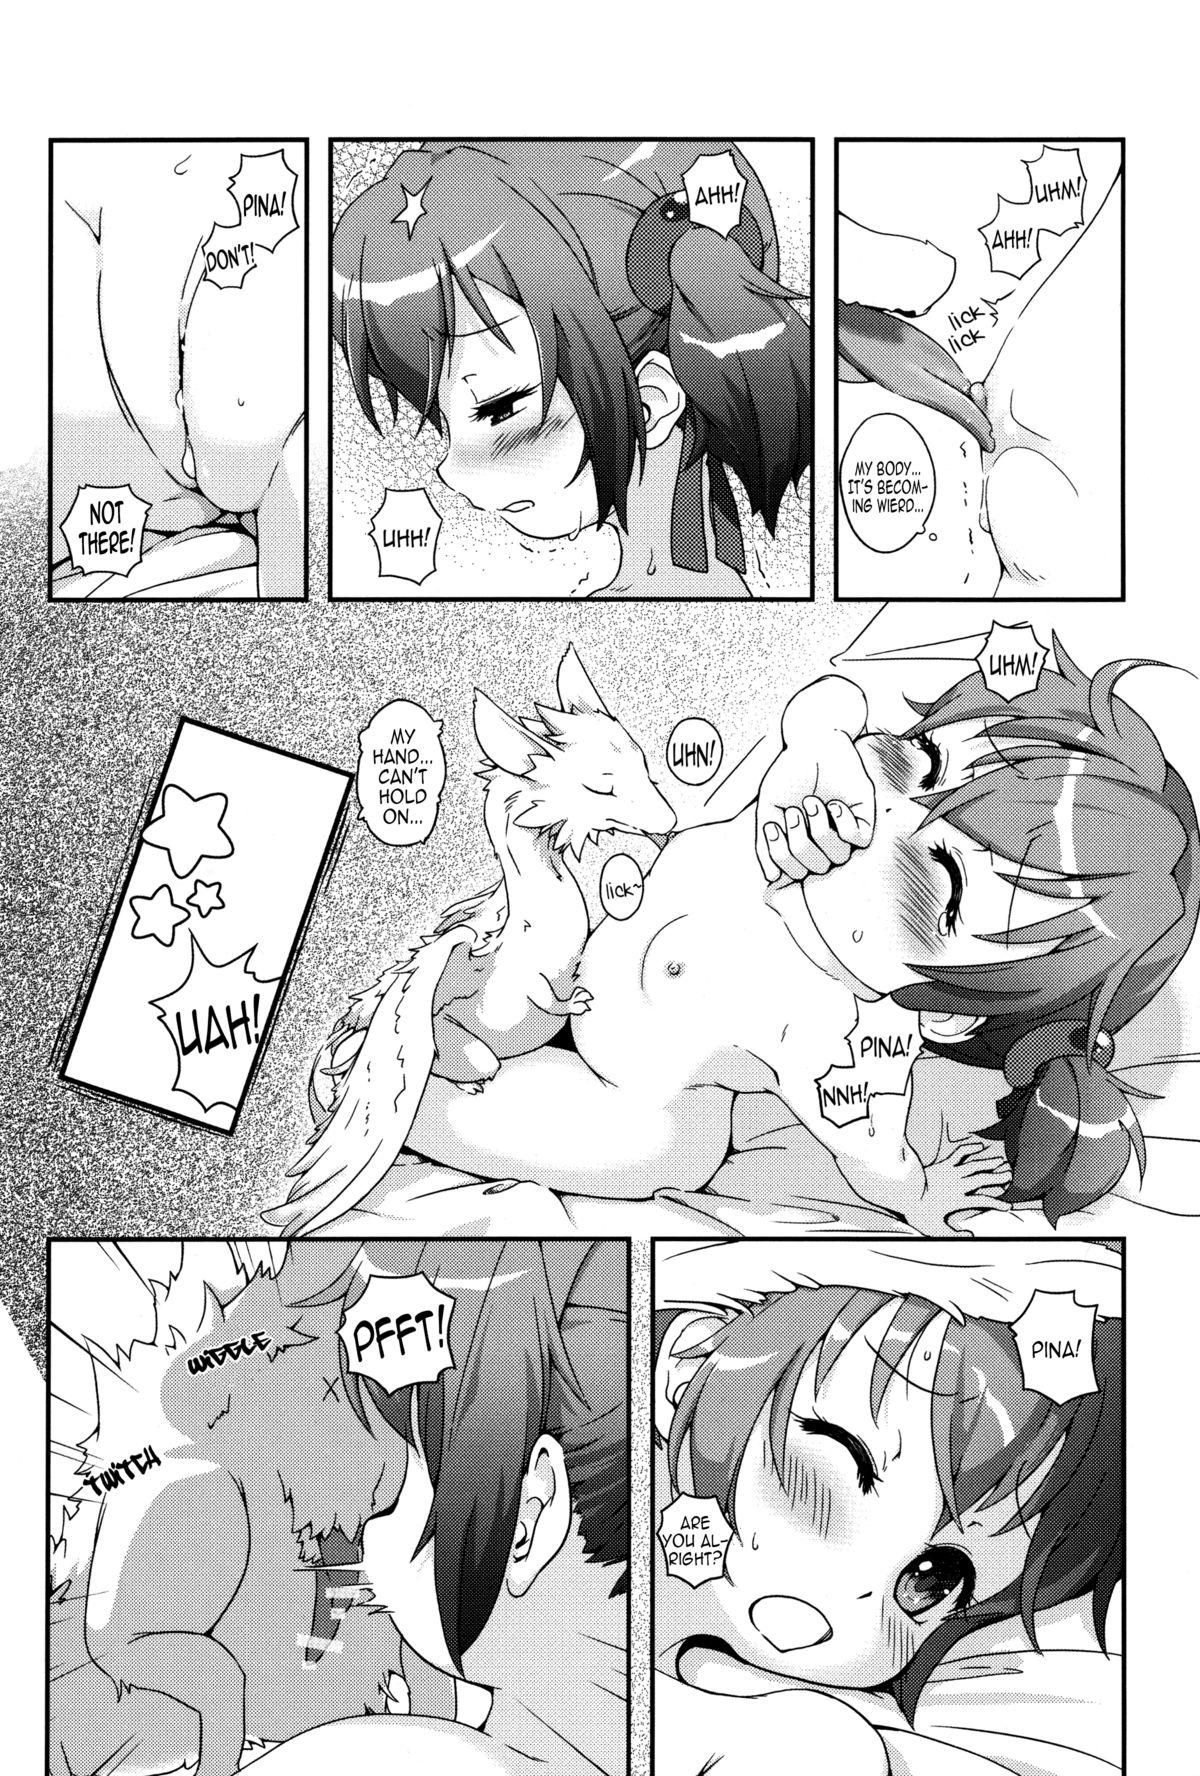 Argentina A Beast Tamer's Special Event - Sword art online Gay Kissing - Page 8